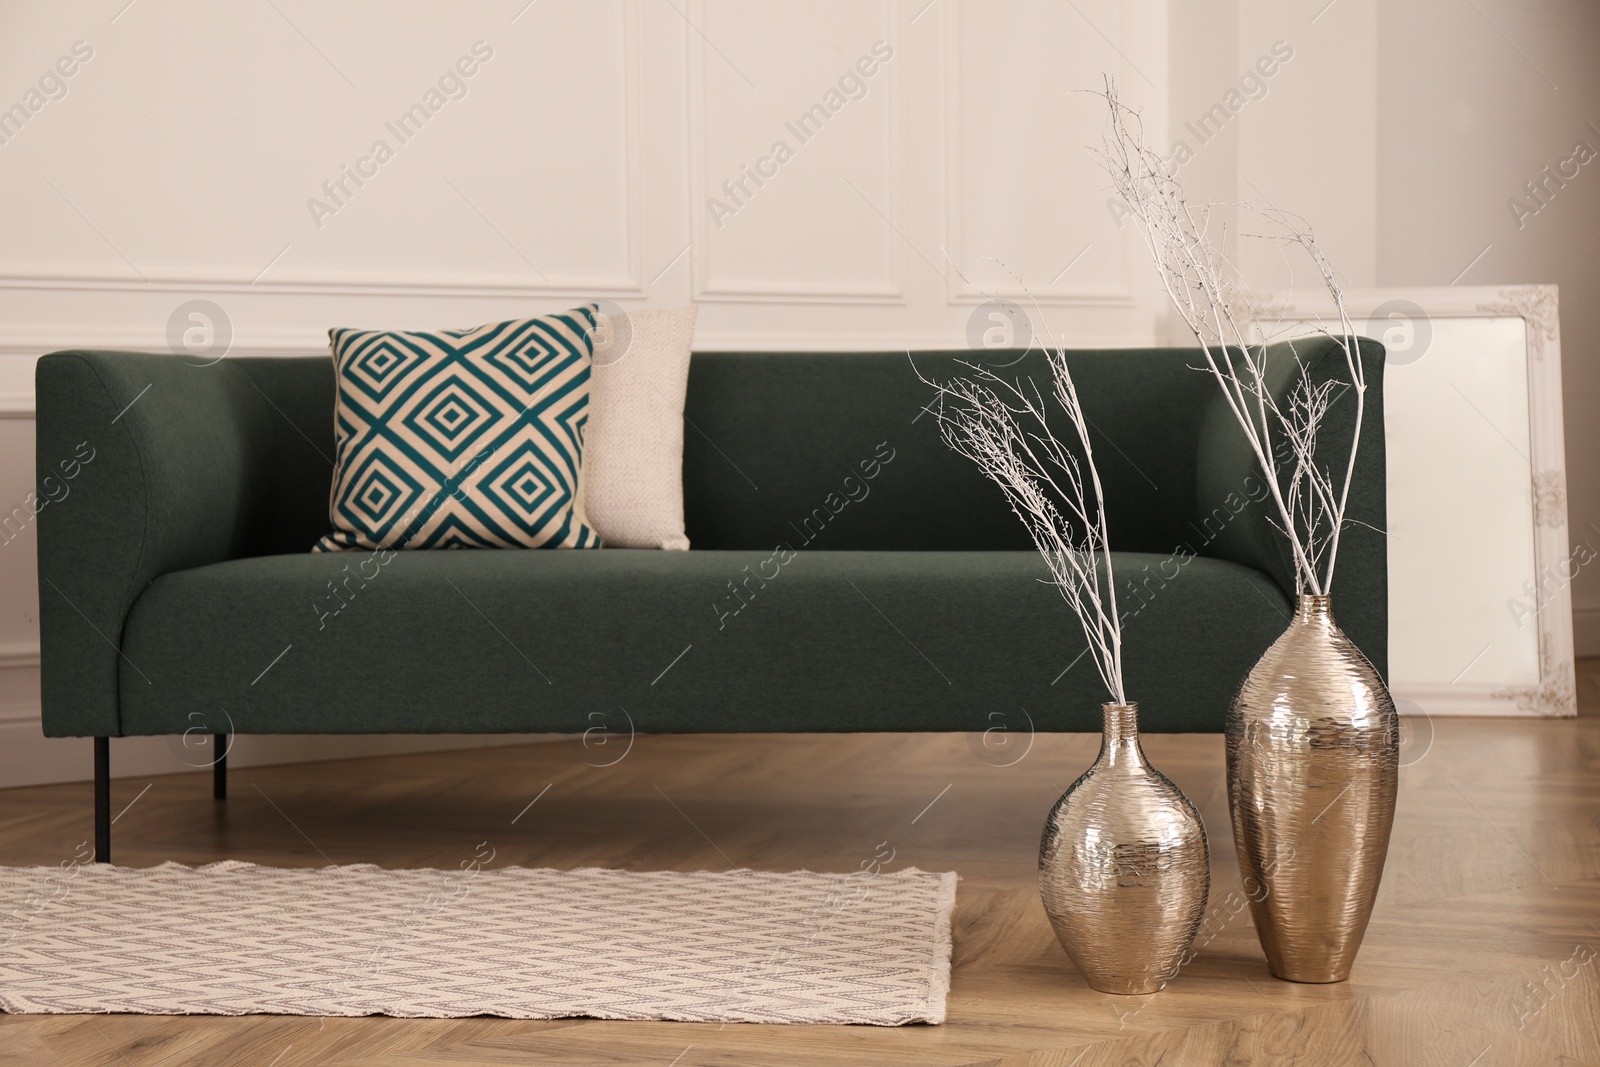 Photo of Metal vases with white tree twigs on floor near sofa in living room